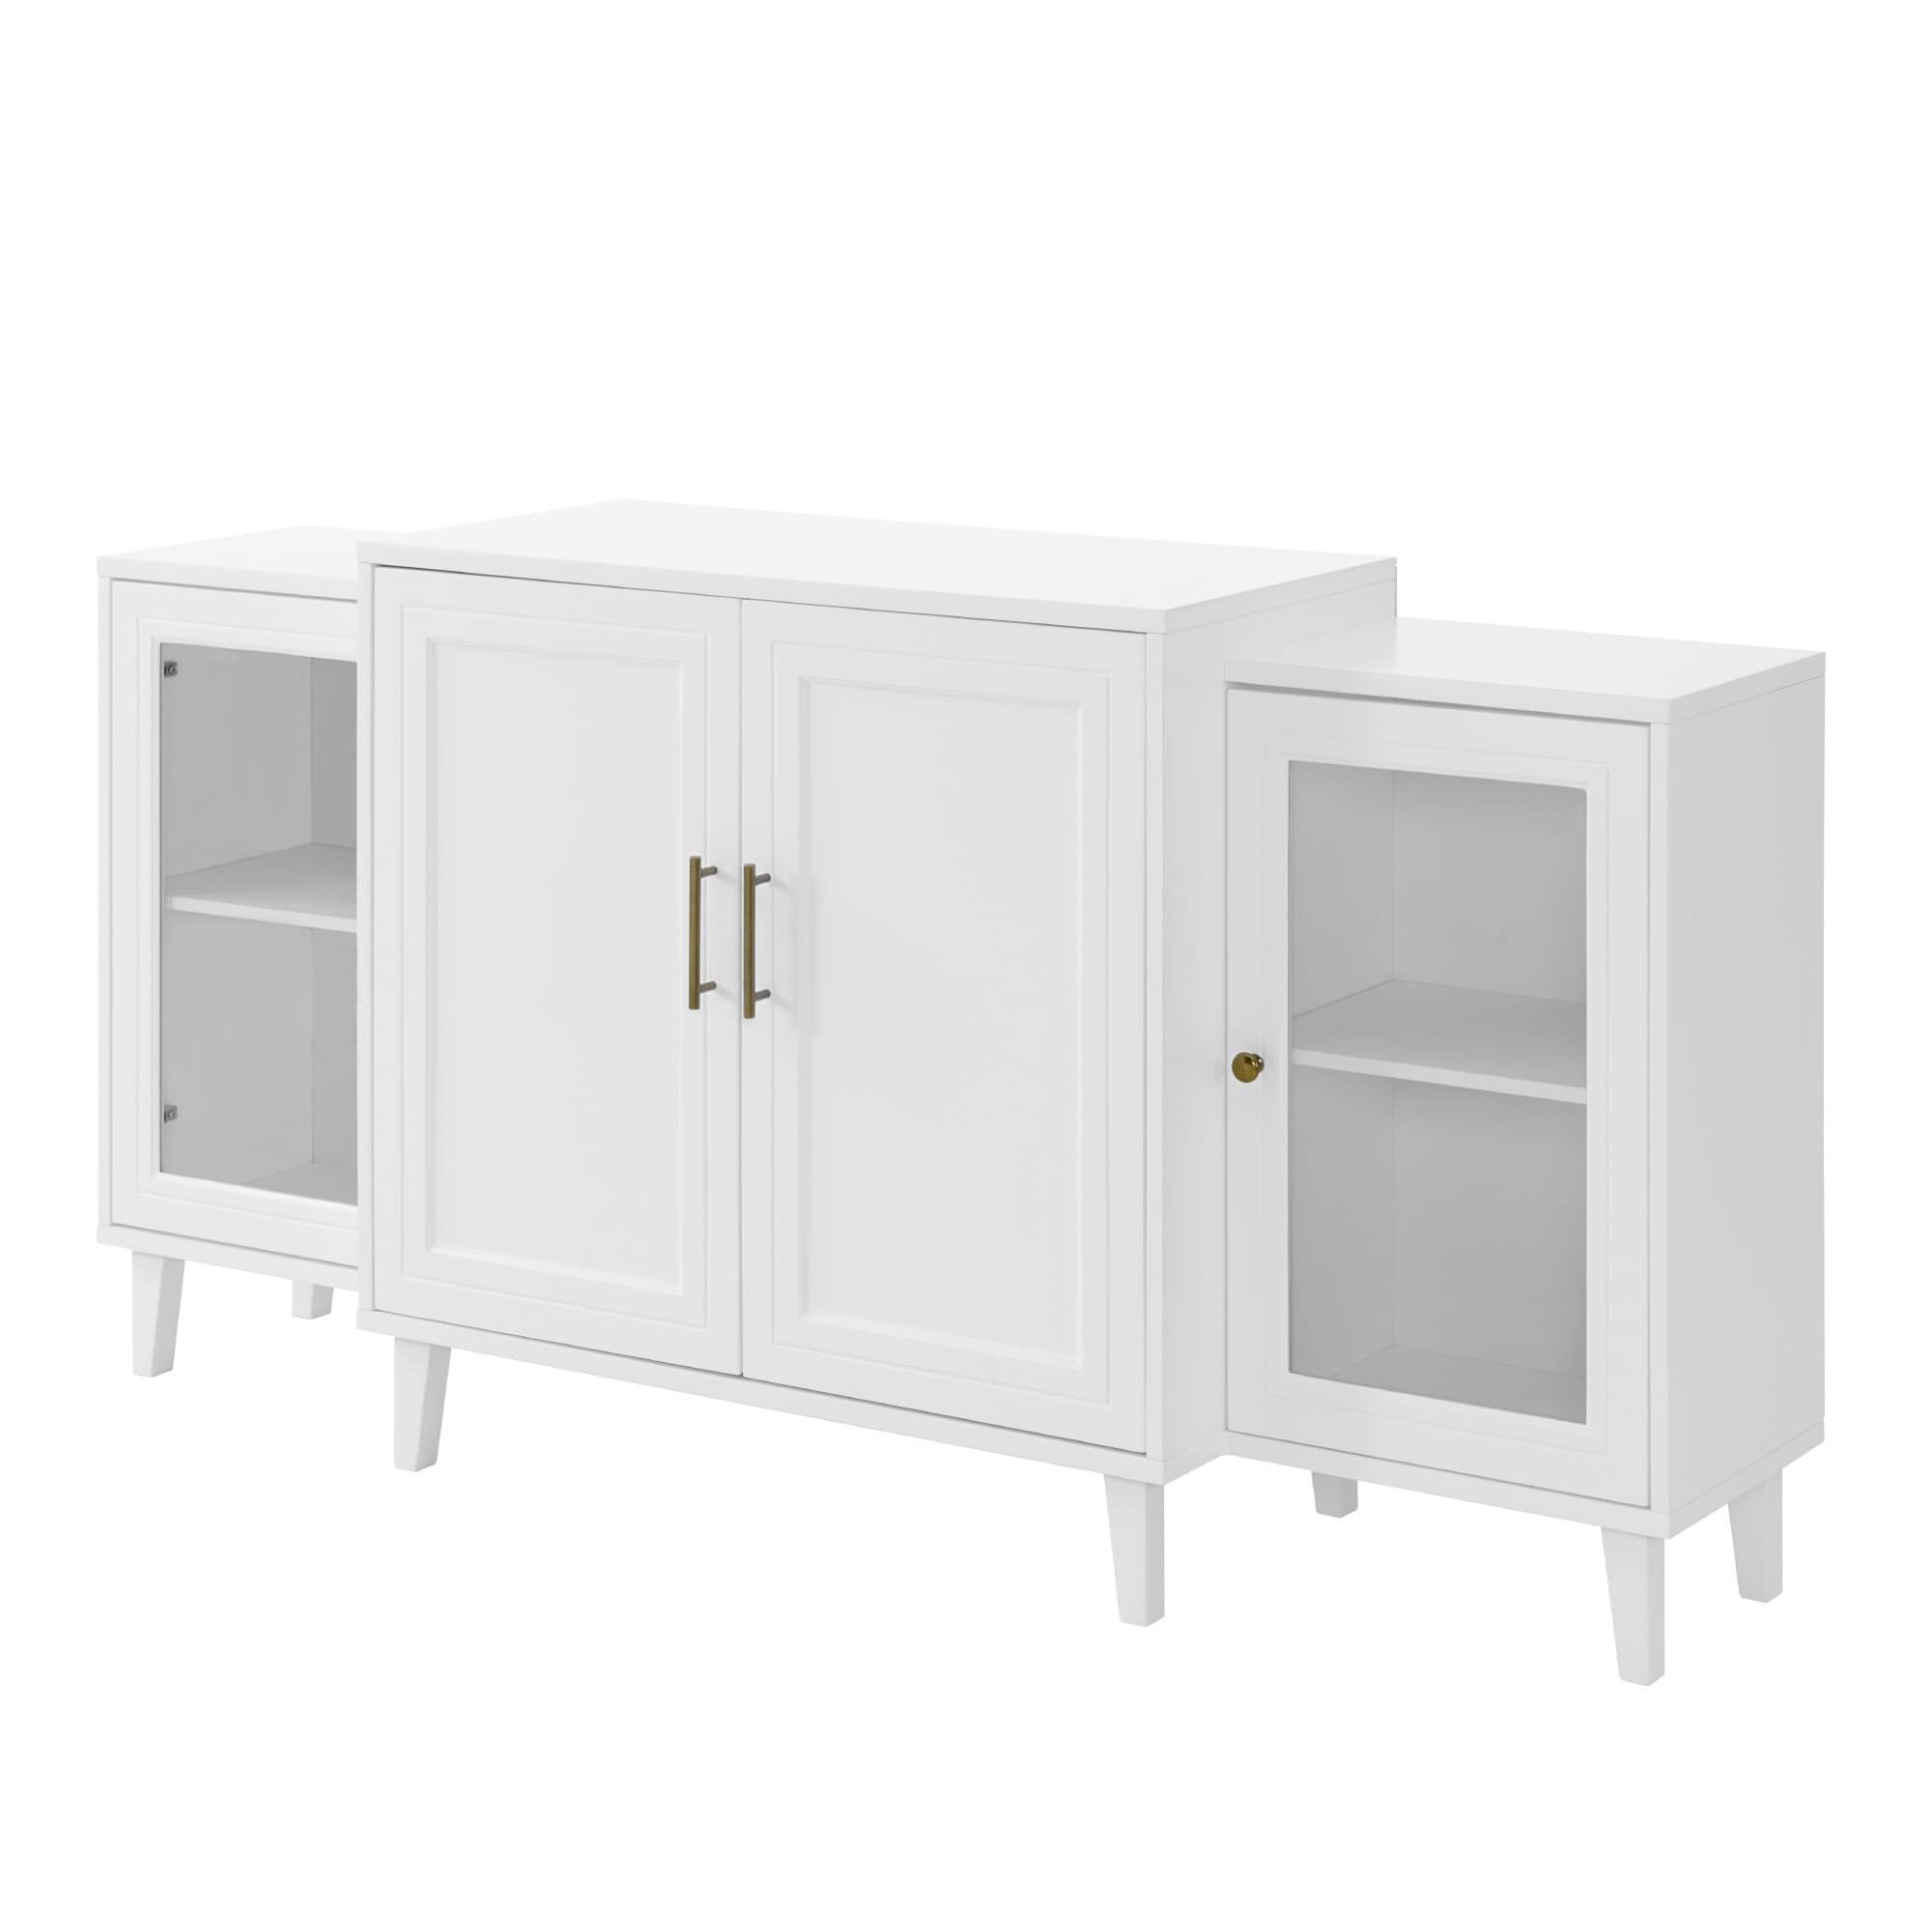 Walker Edison Transitional White Console Table with Adjustable Shelves ...